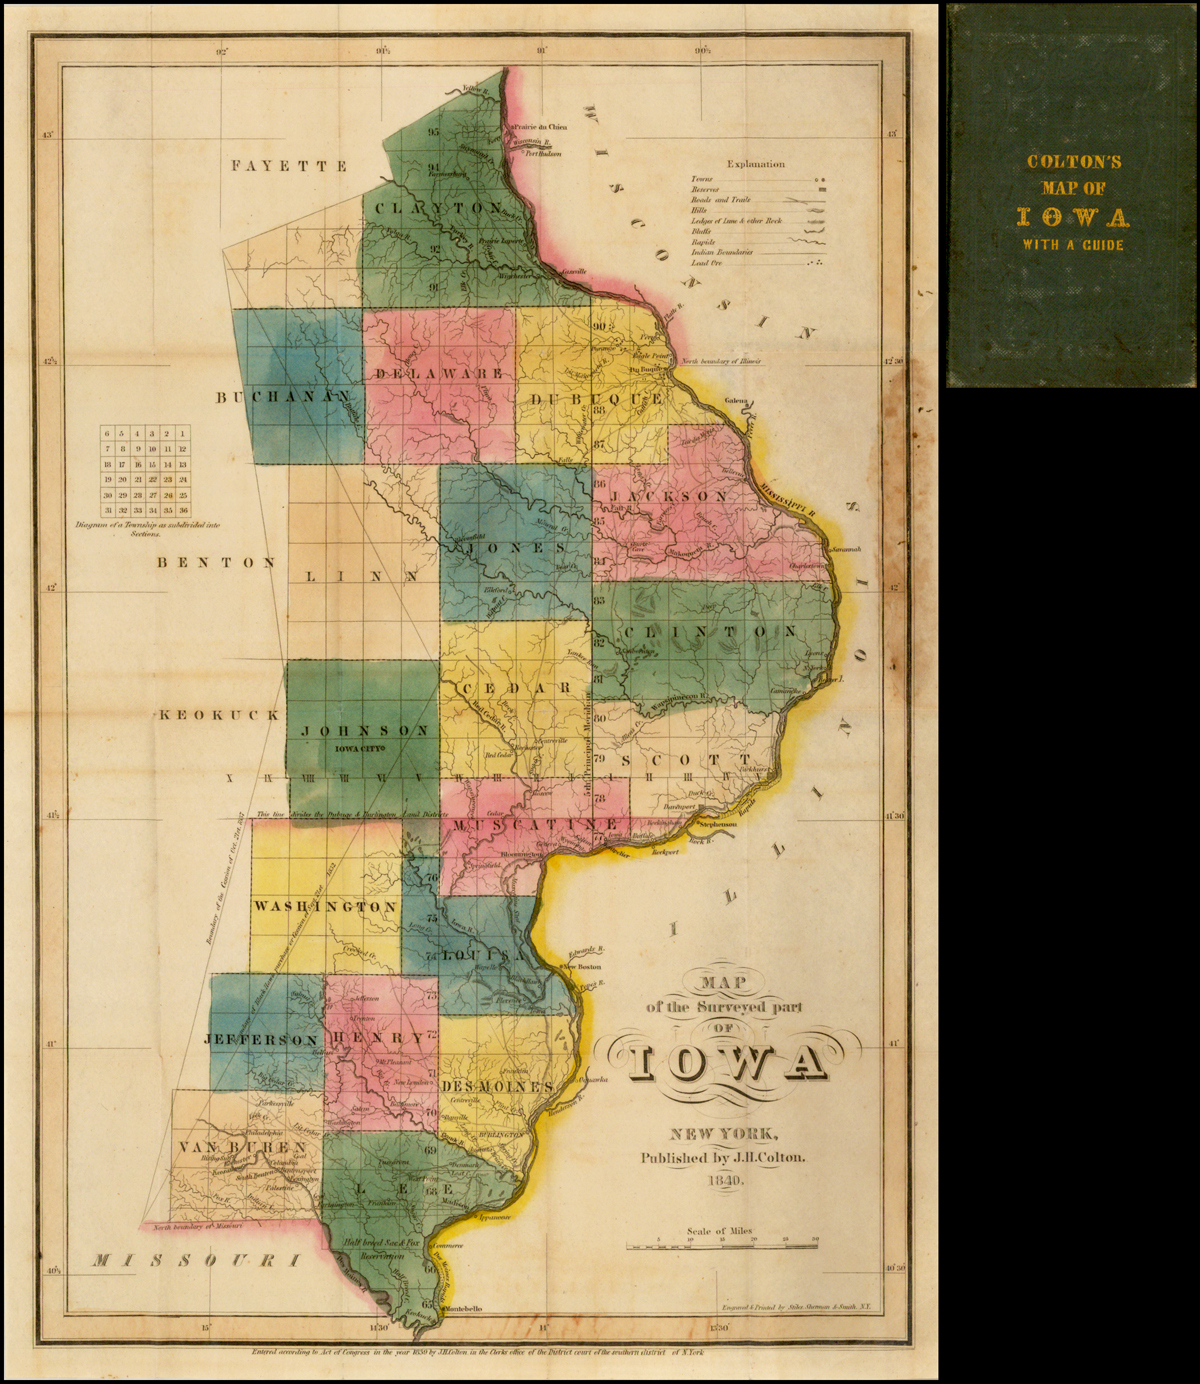 Map Of The Surveyed Part Of Iowa 1840 With Guide For The